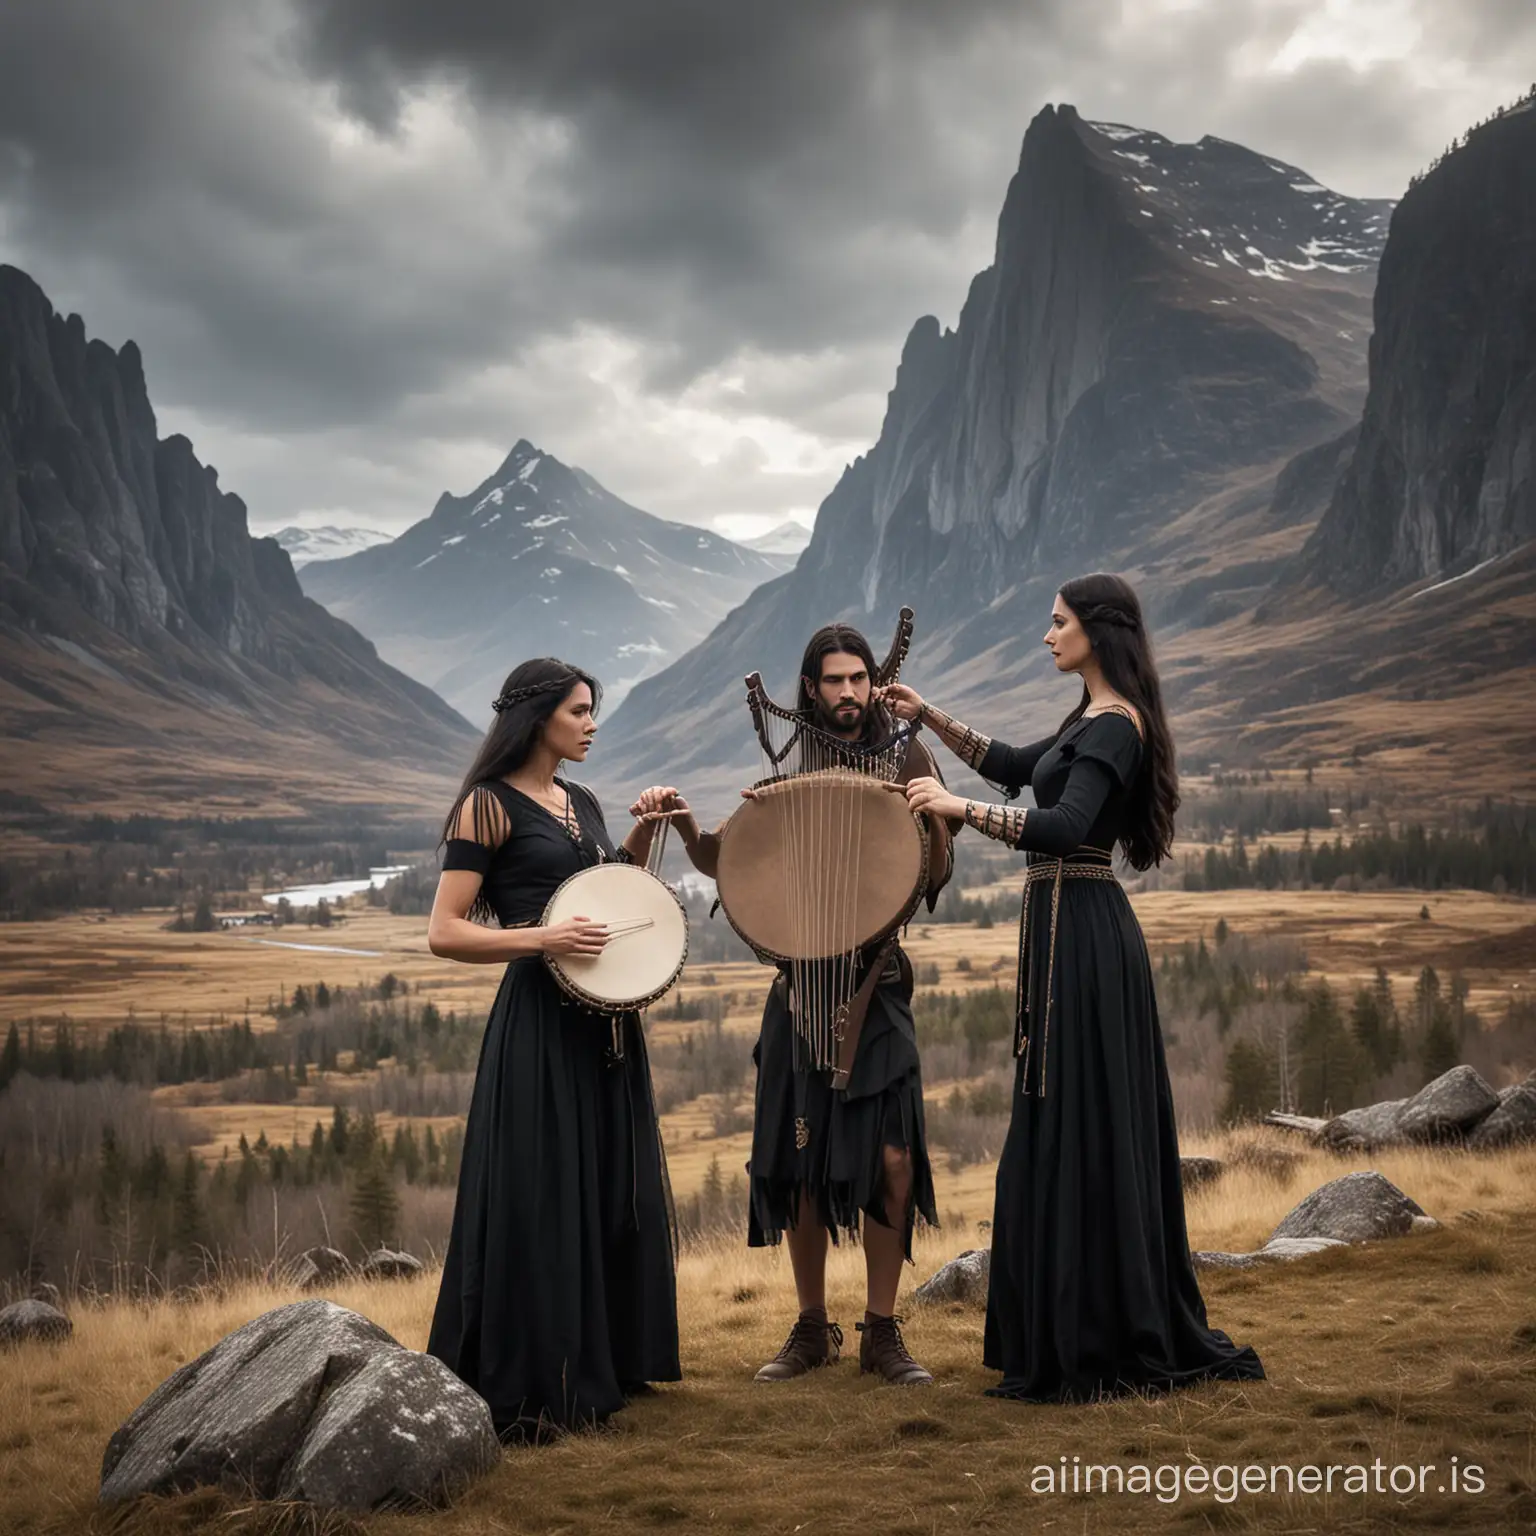 Norse-Man-and-Woman-Performing-Music-against-Mountain-Backdrop